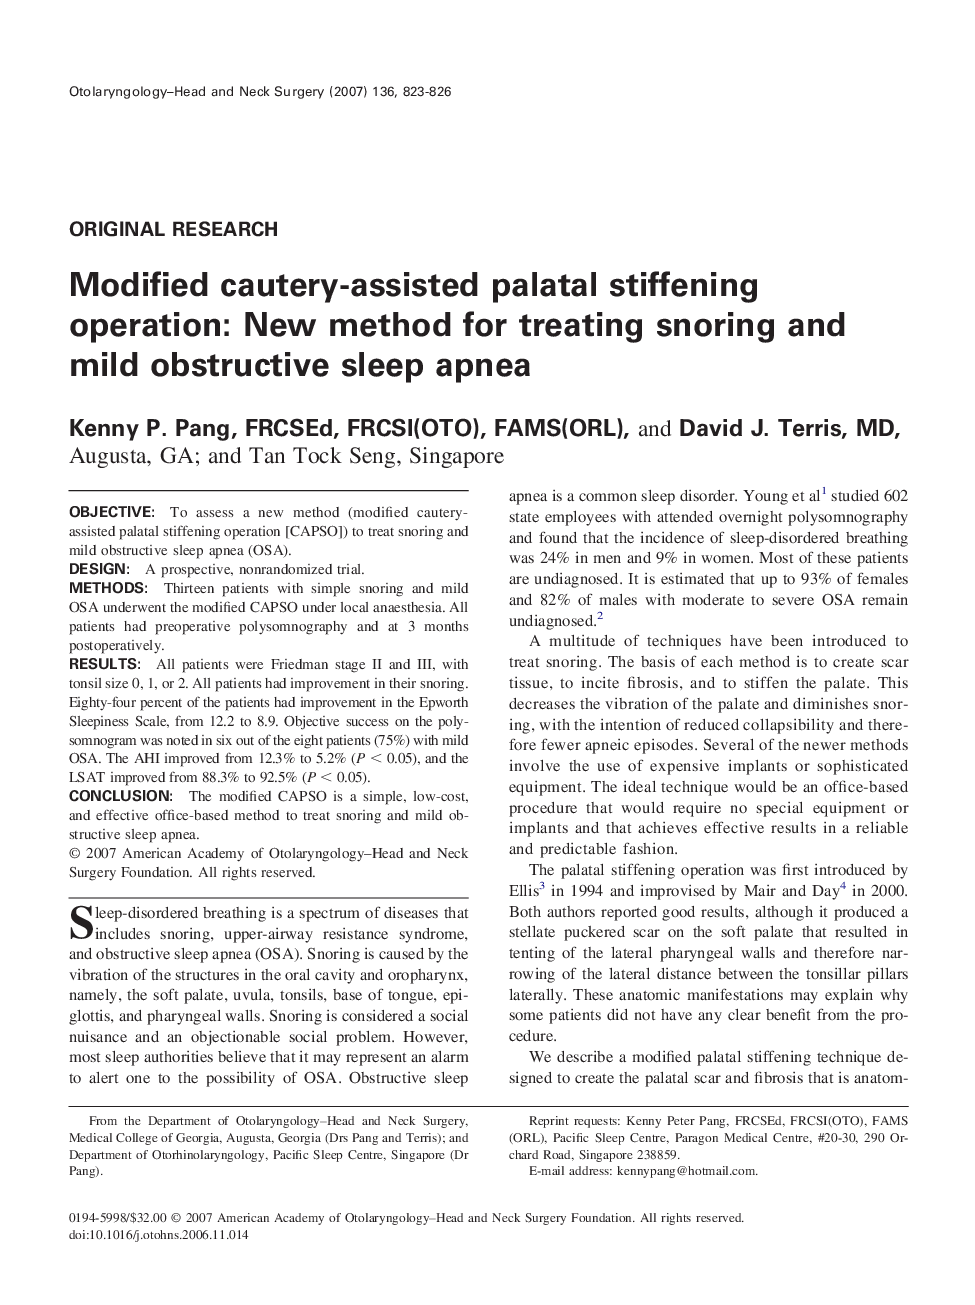 Modified cautery-assisted palatal stiffening operation: New method for treating snoring and mild obstructive sleep apnea